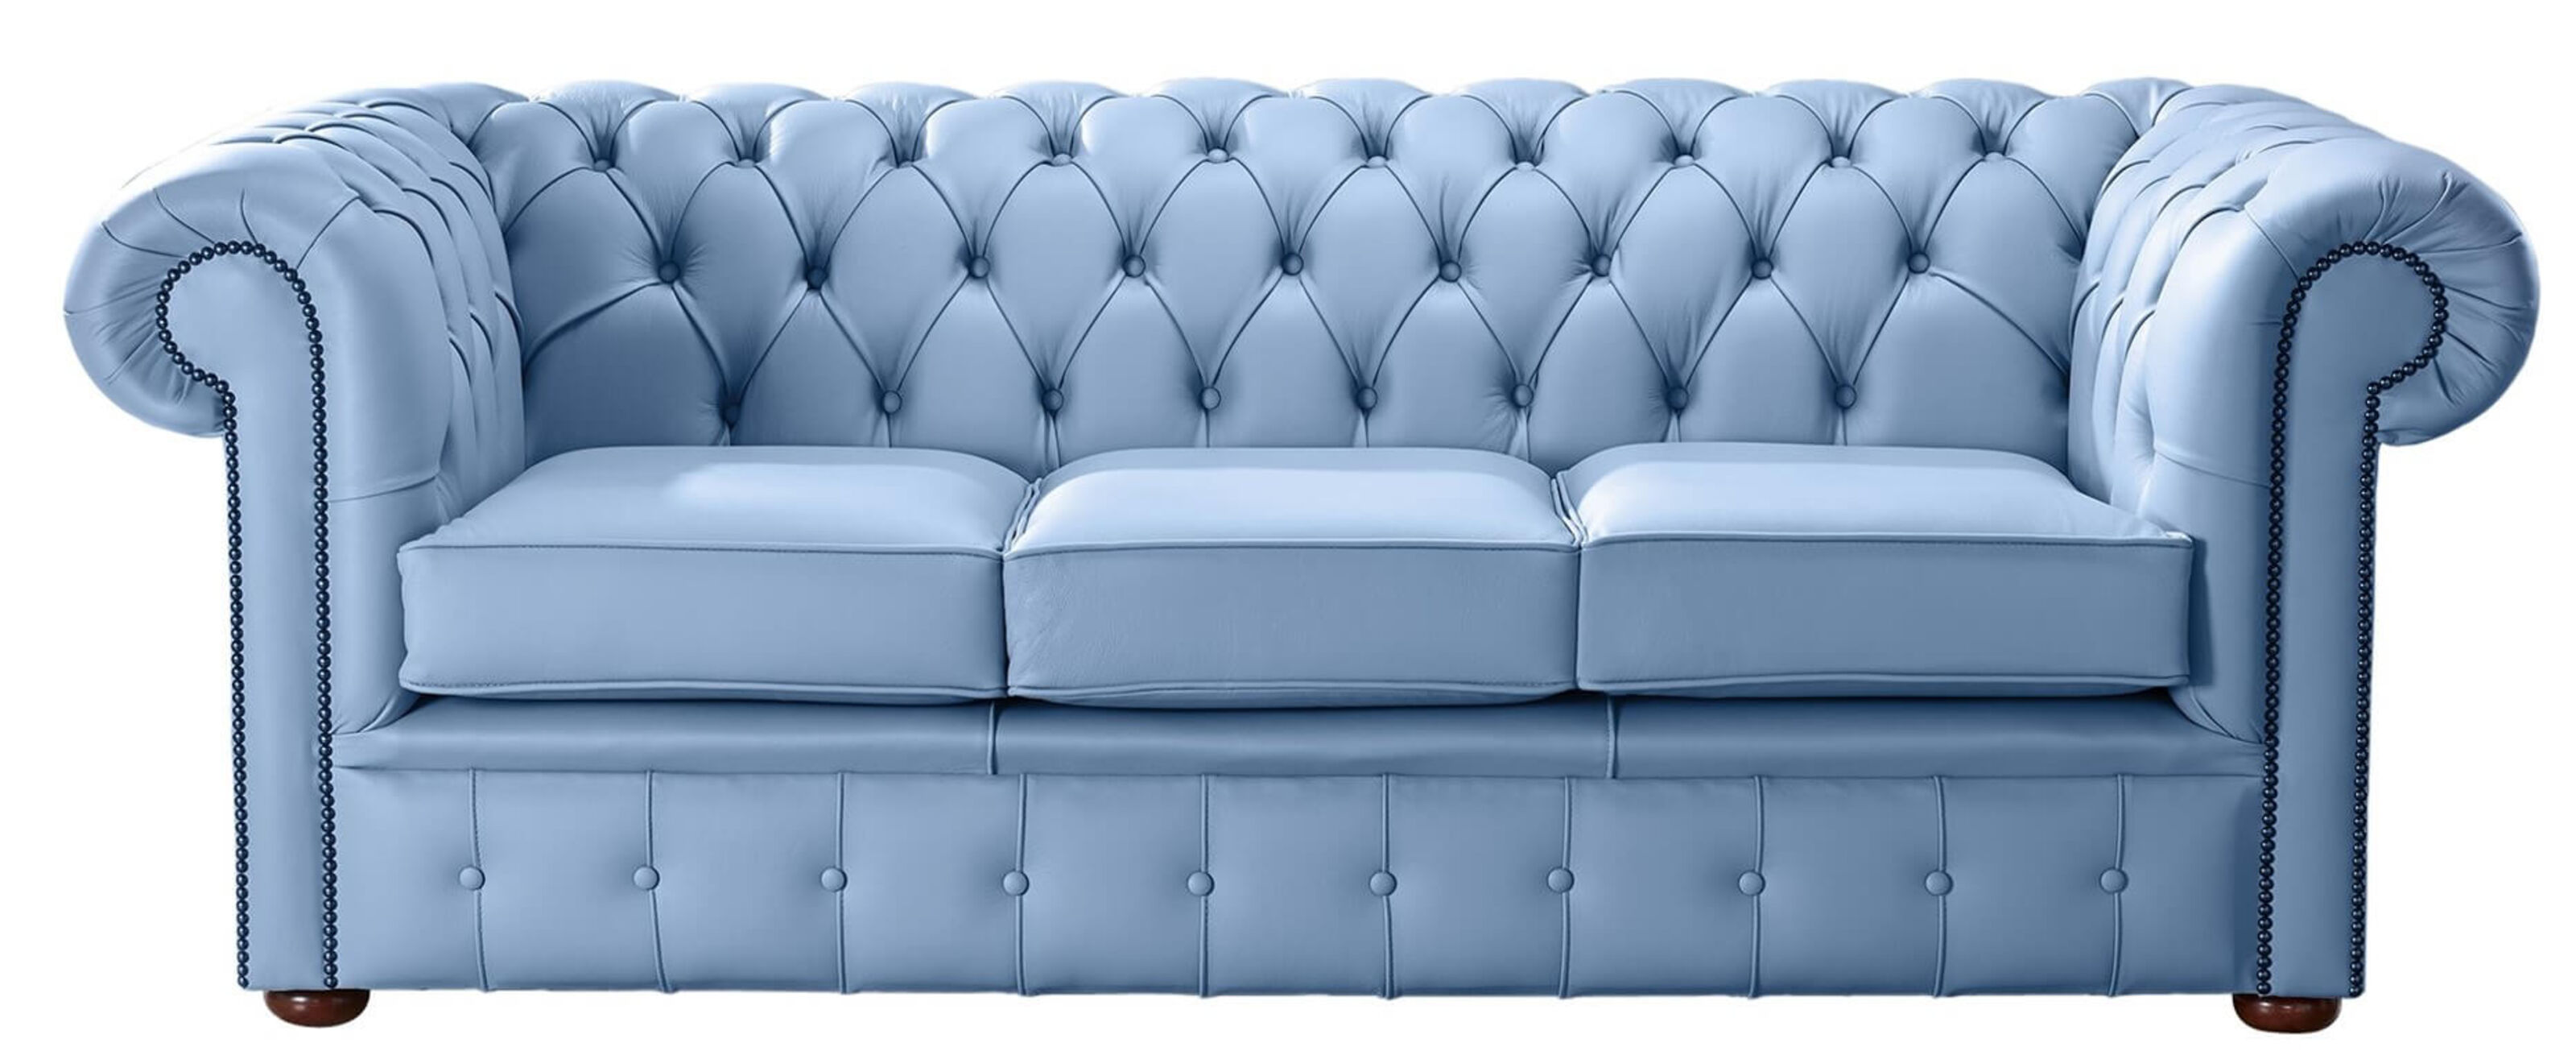 Explore Nearby Chesterfield Sofas for Sale Your Local Source for Timeless Comfort  %Post Title